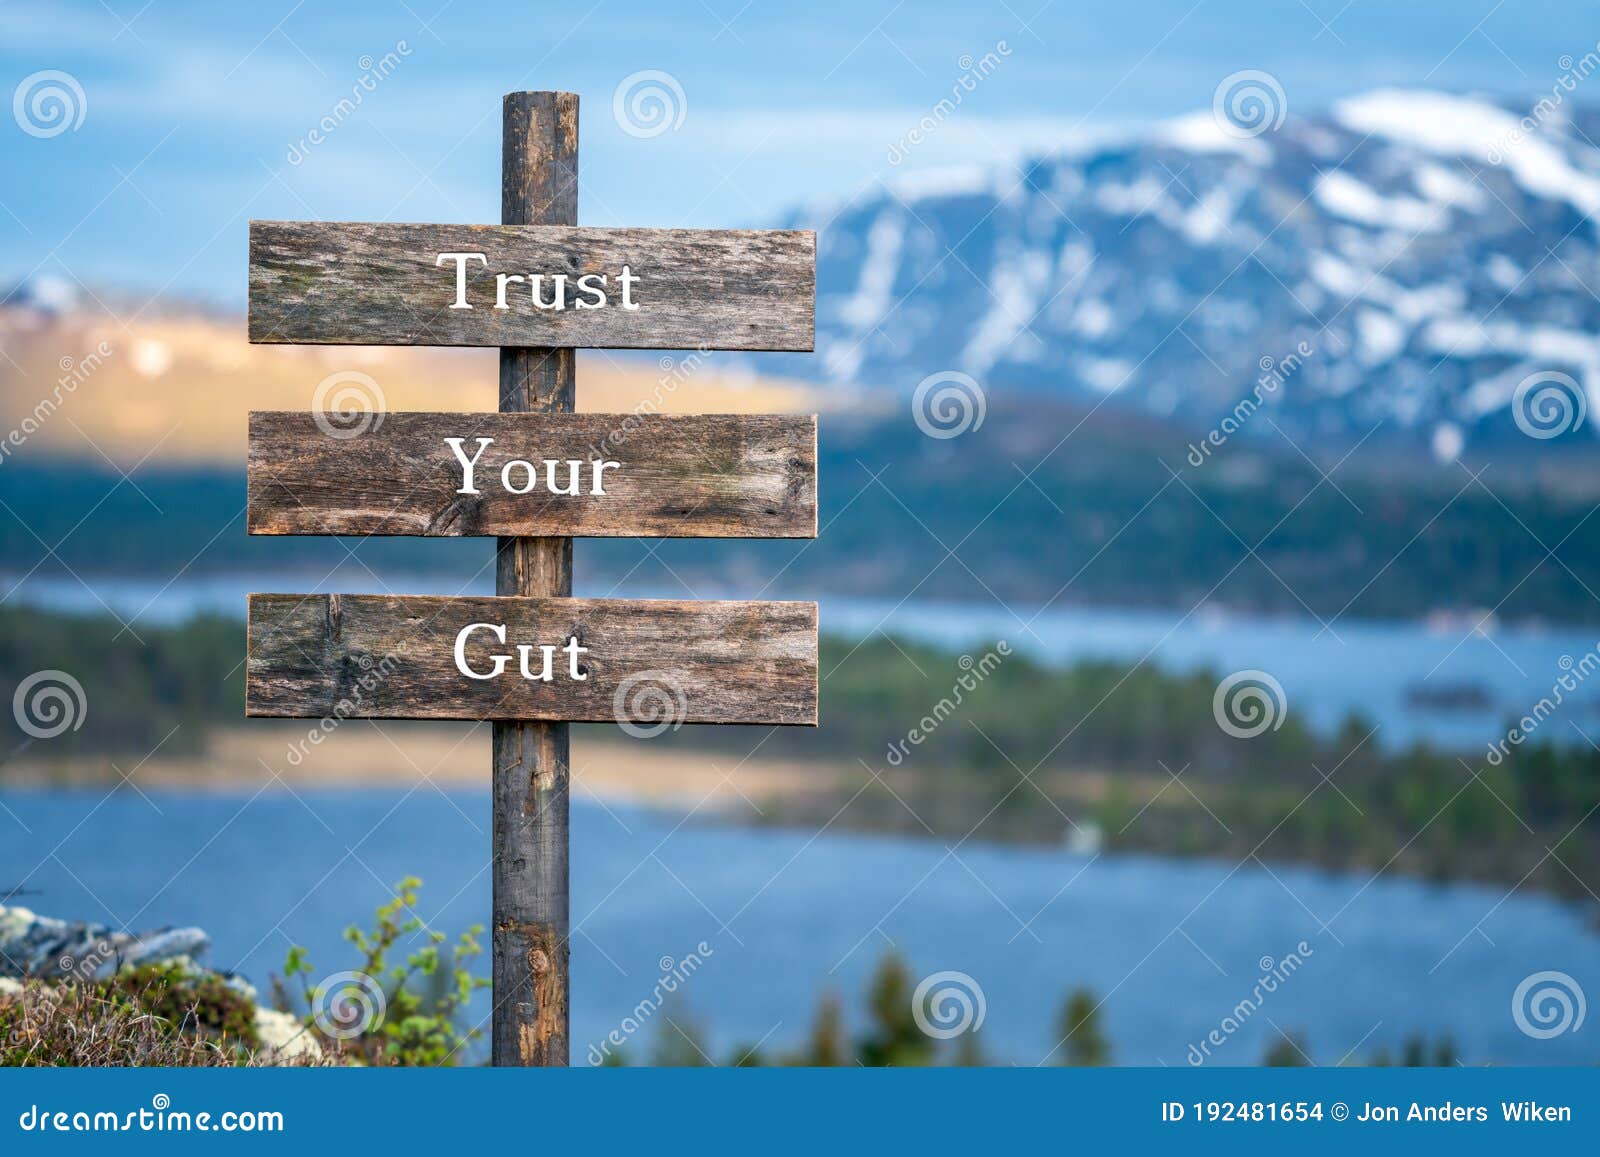 trust your gut text on signpost outdoors during blue hour and sunset.